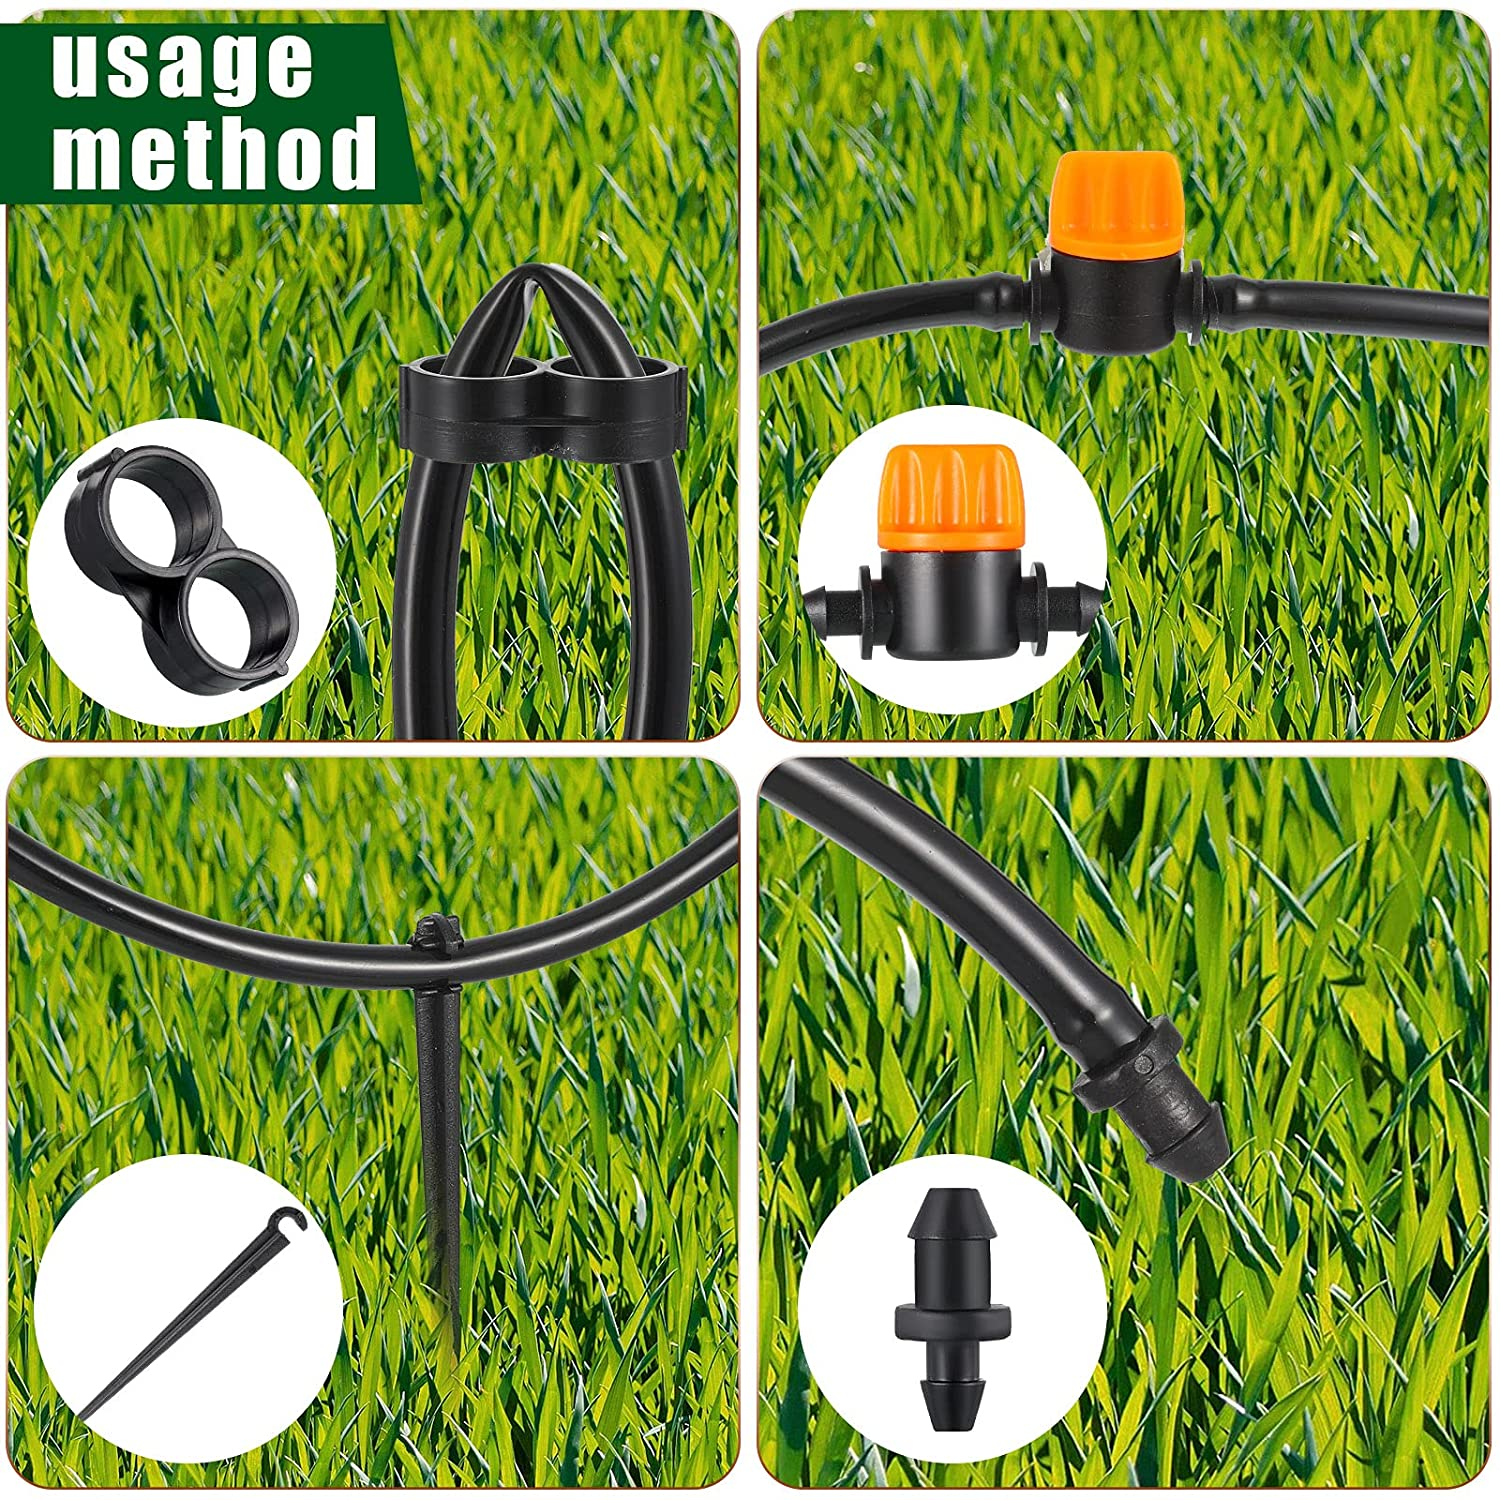 117 Pieces Irrigation Hose Barb Connectors Kit for 1/4 Inch Tubing, Drip Irrigation Hose Connectors for Garden Lawn Drip or Sprinkler Systems